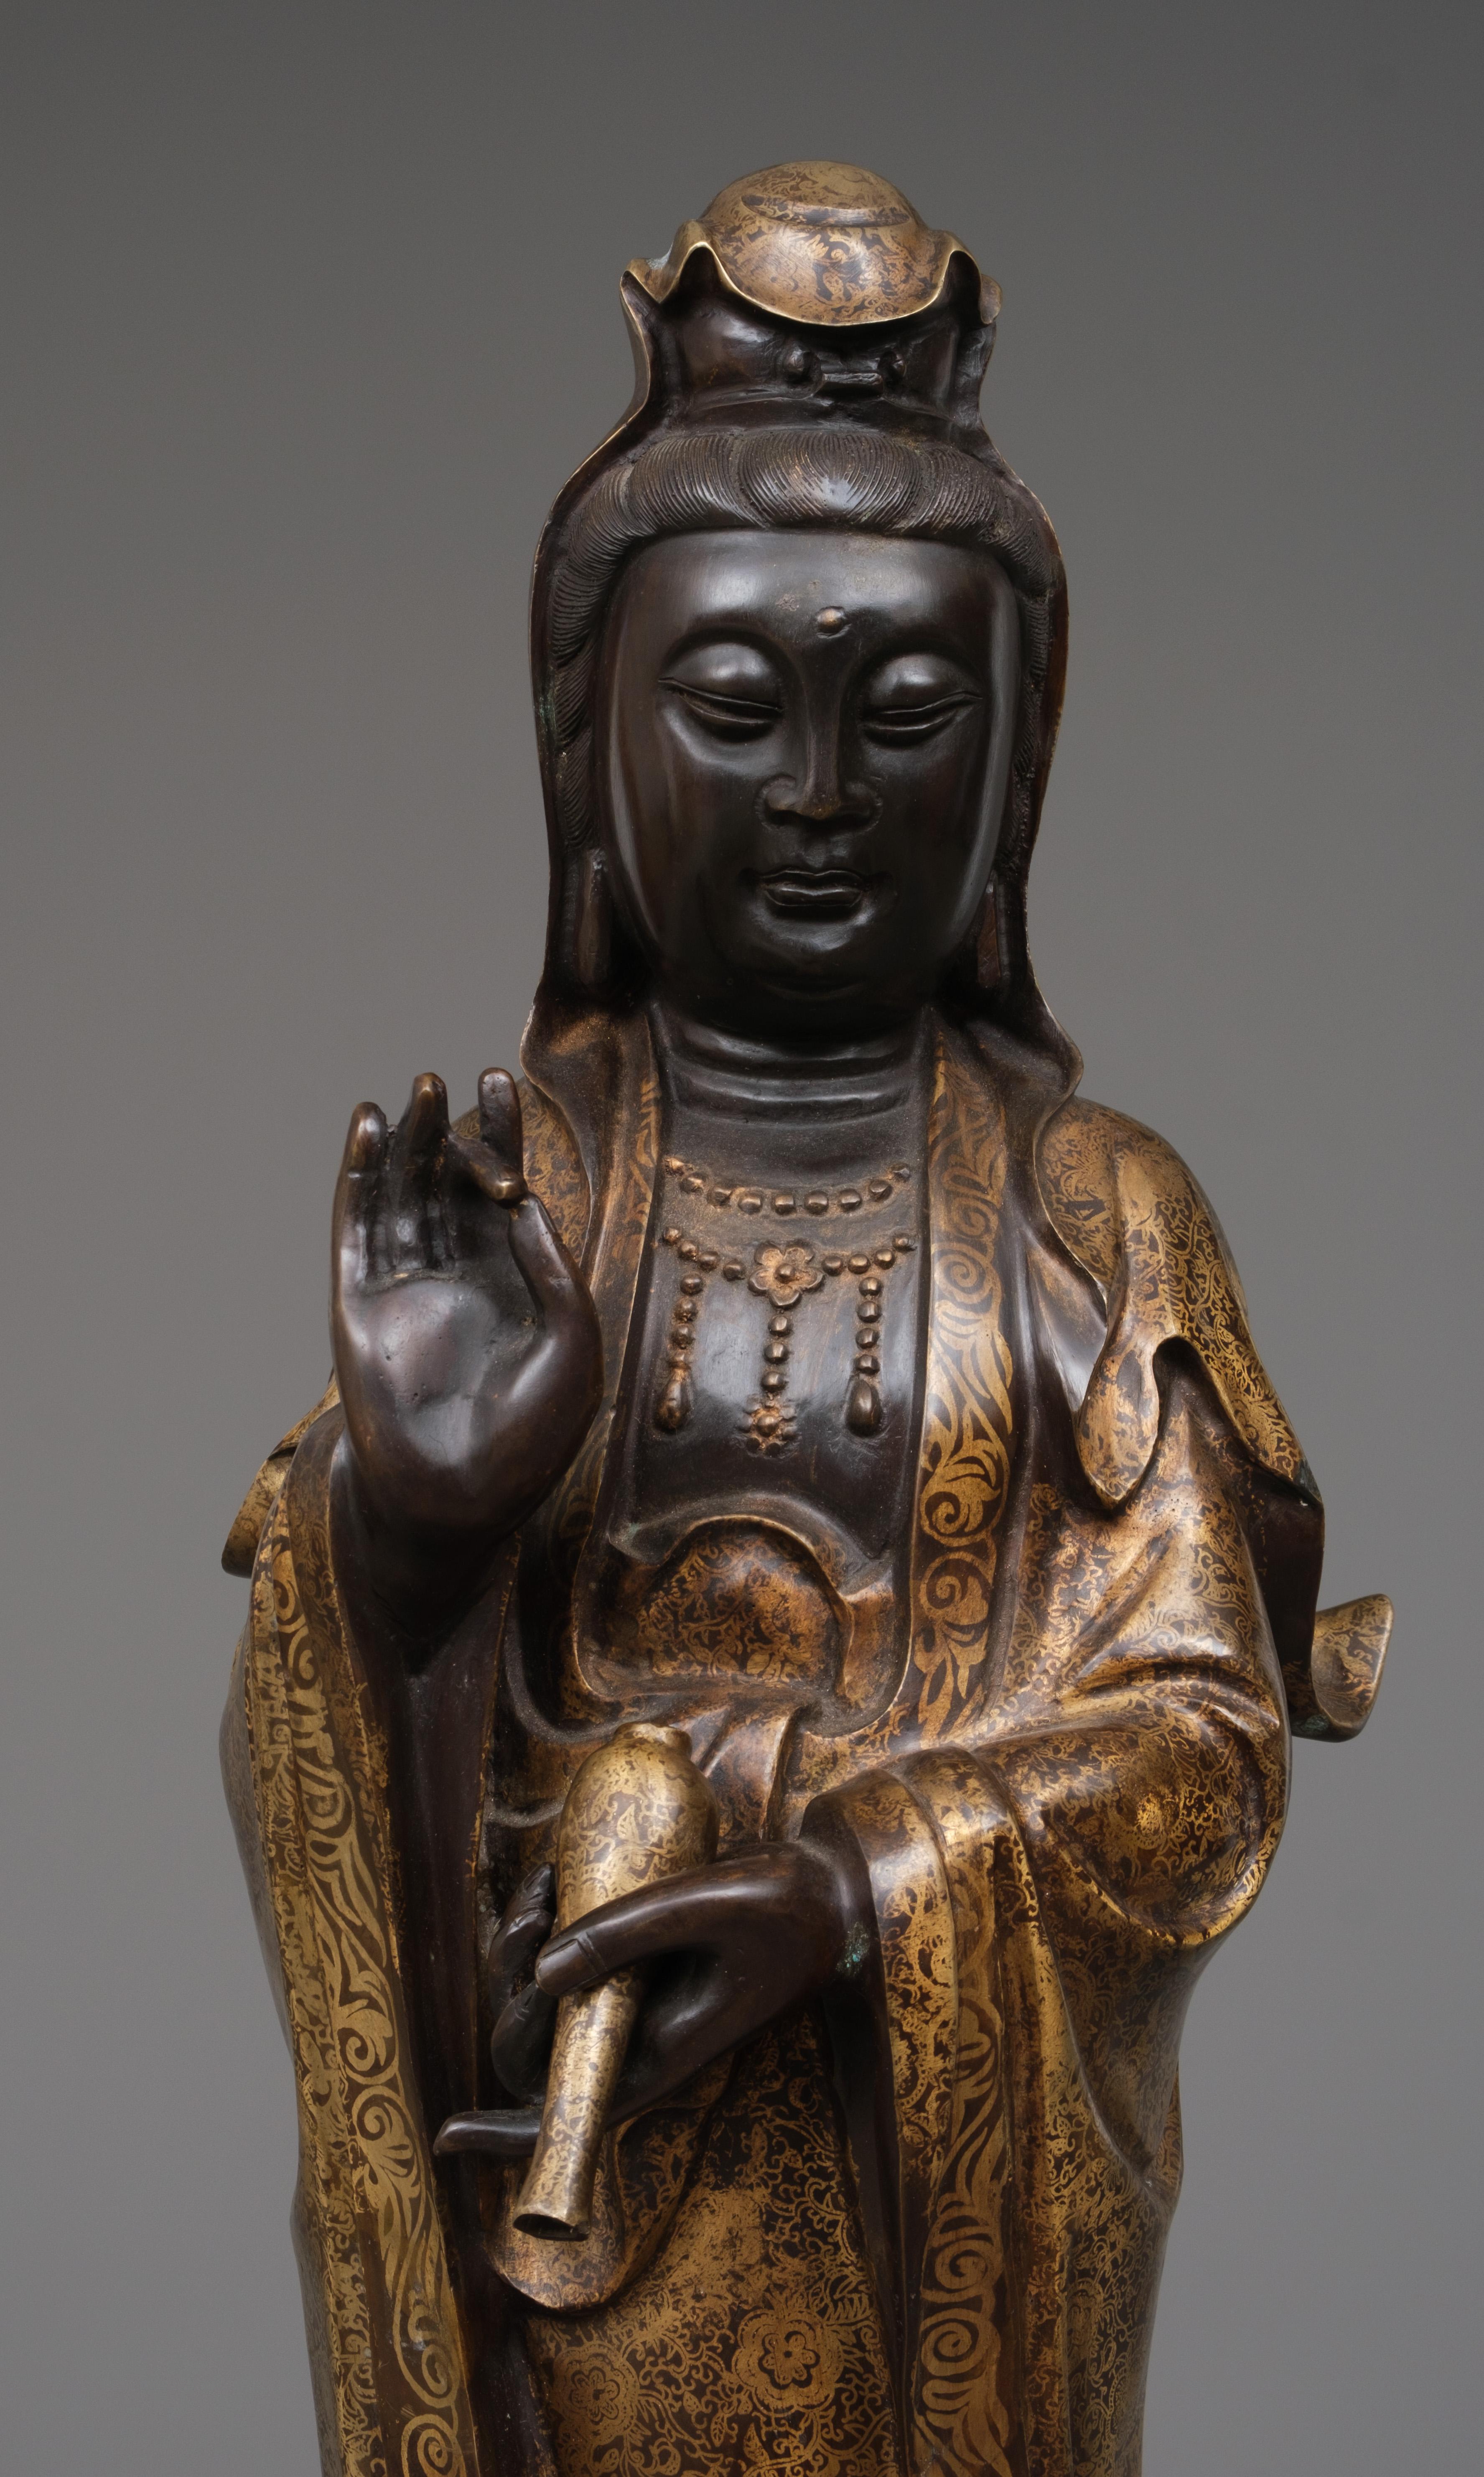 Impressive, capital Chinese bronze figure of a standing bodhisattva Guanyin, revered as the Goddess of Mercy, also recognized as Avalokiteshvara or Kannon. The figure is masterfully crafted as a single piece from dark brown patinated bronze, with